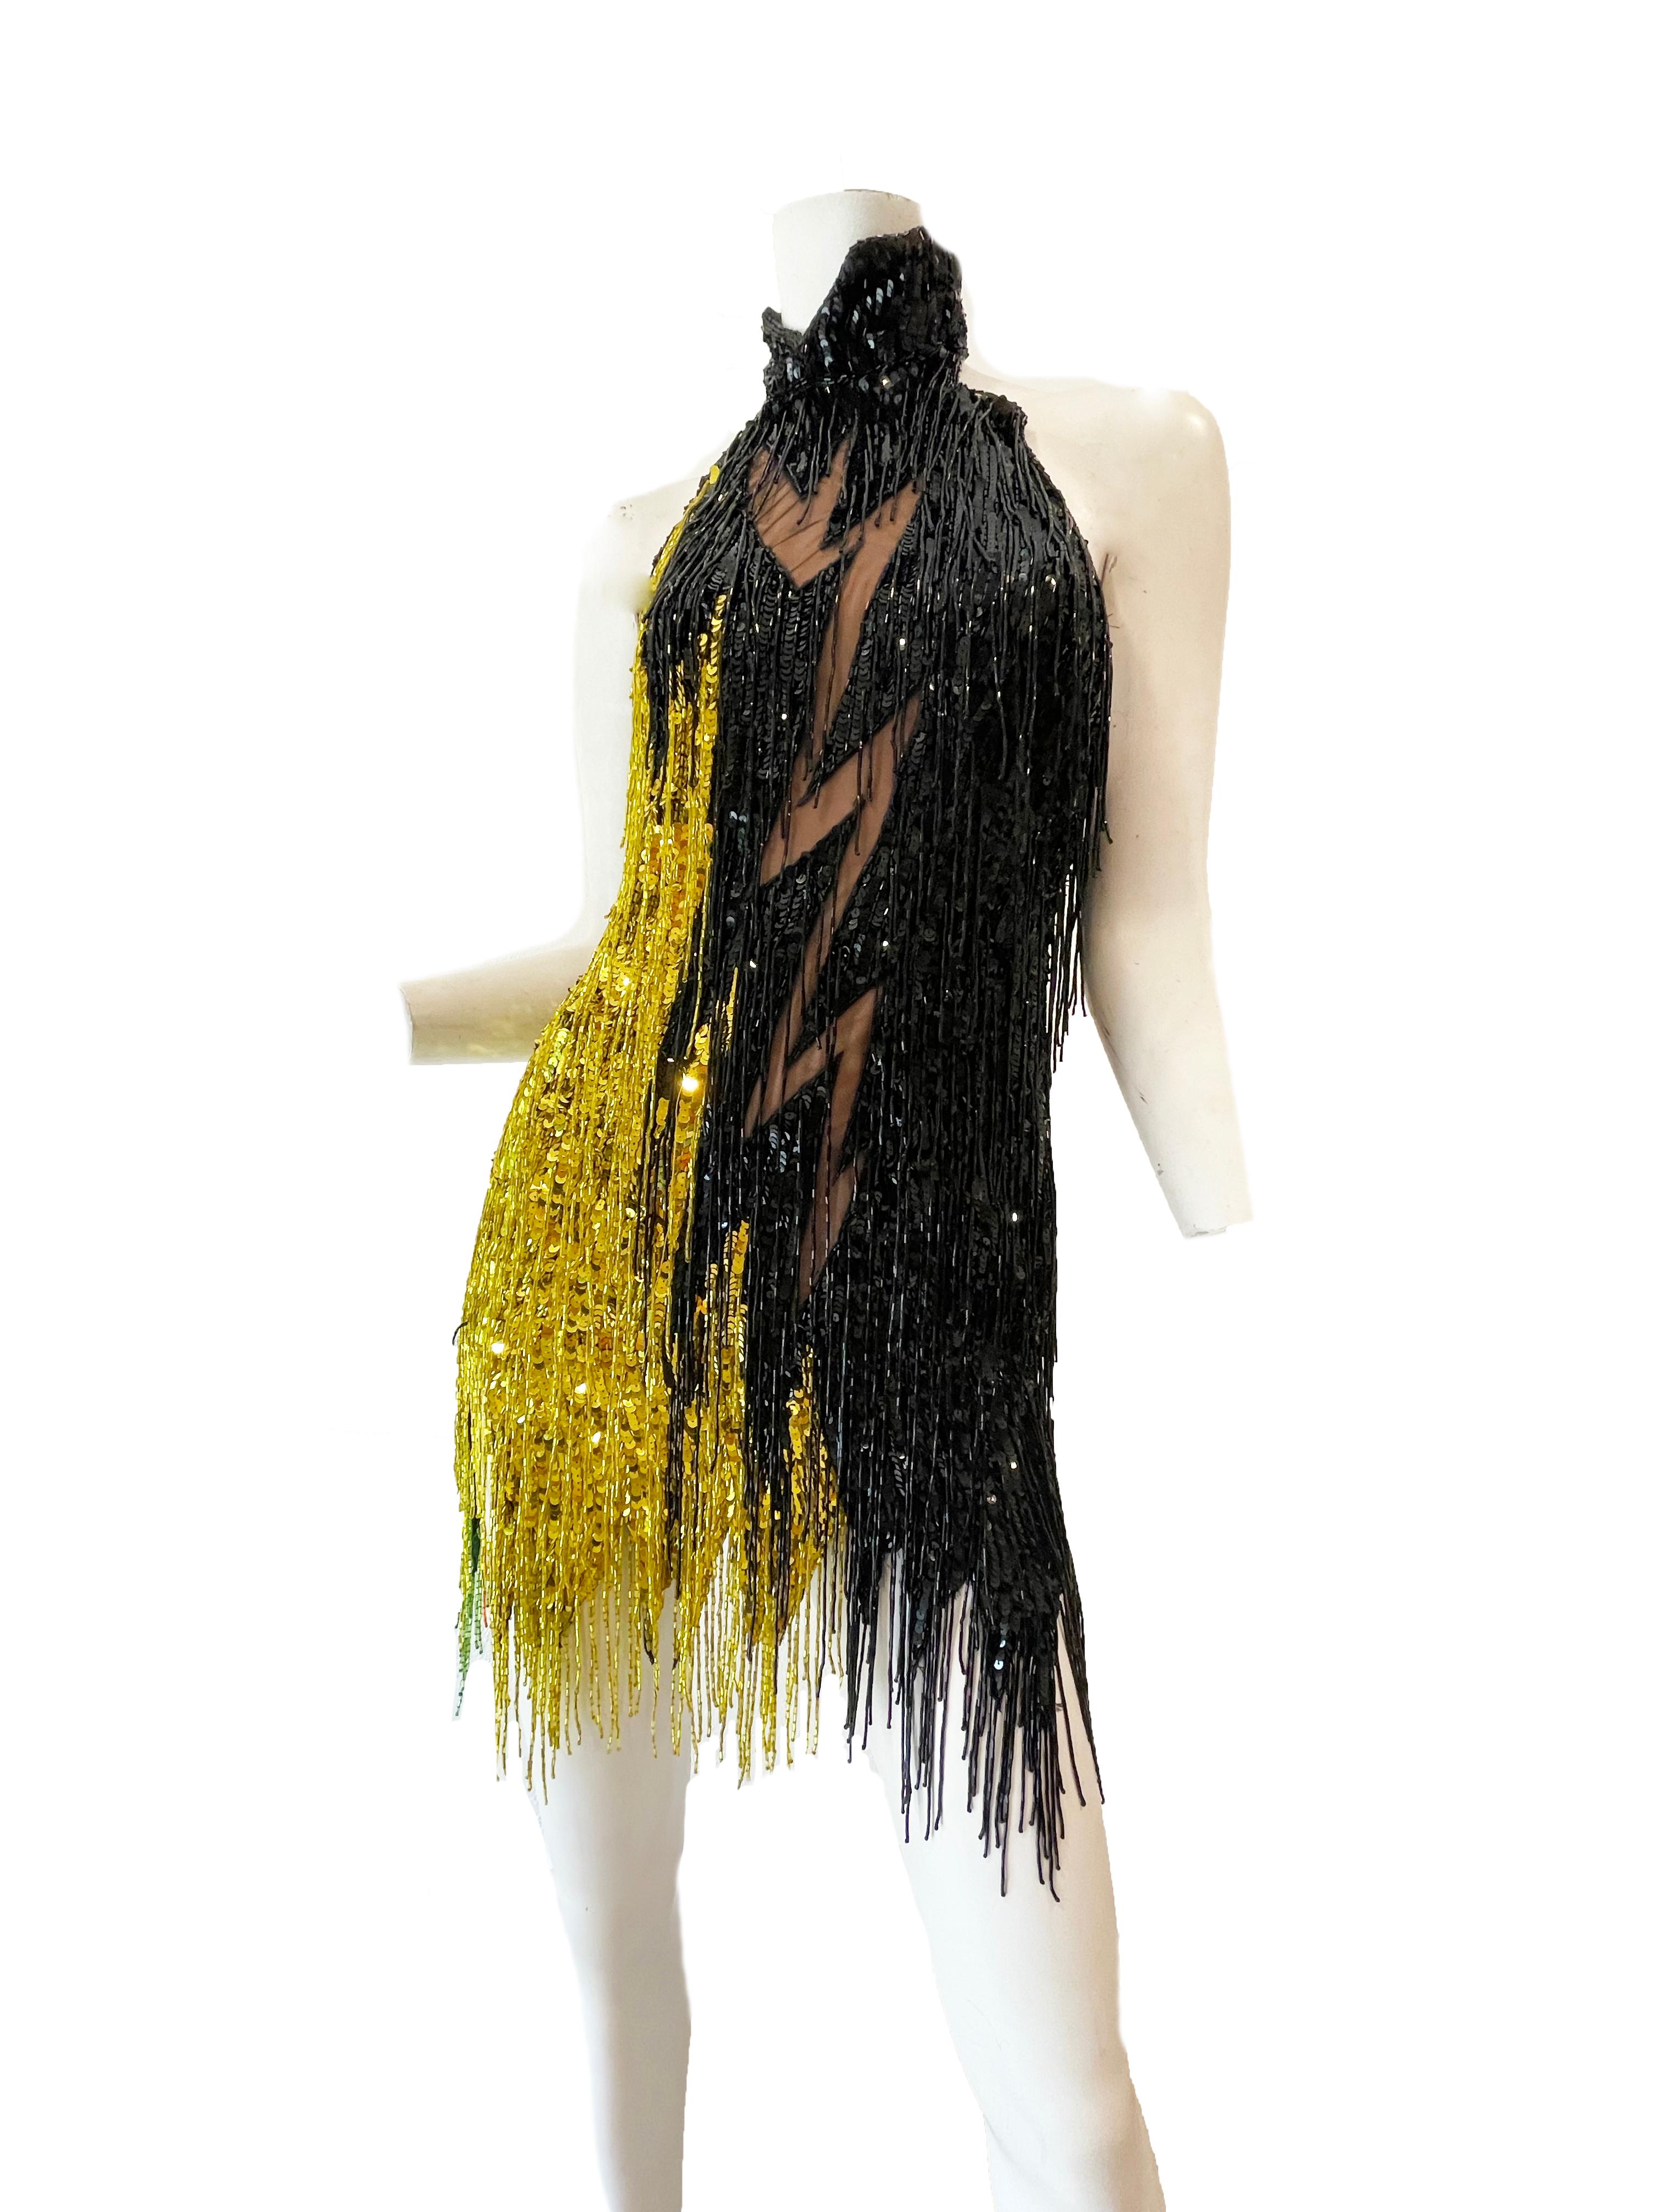 1982 Bob Mackie Couture Beaded Lighting Bolt Dress with Sheer Panels. Condition: Excellent
size S/ M 